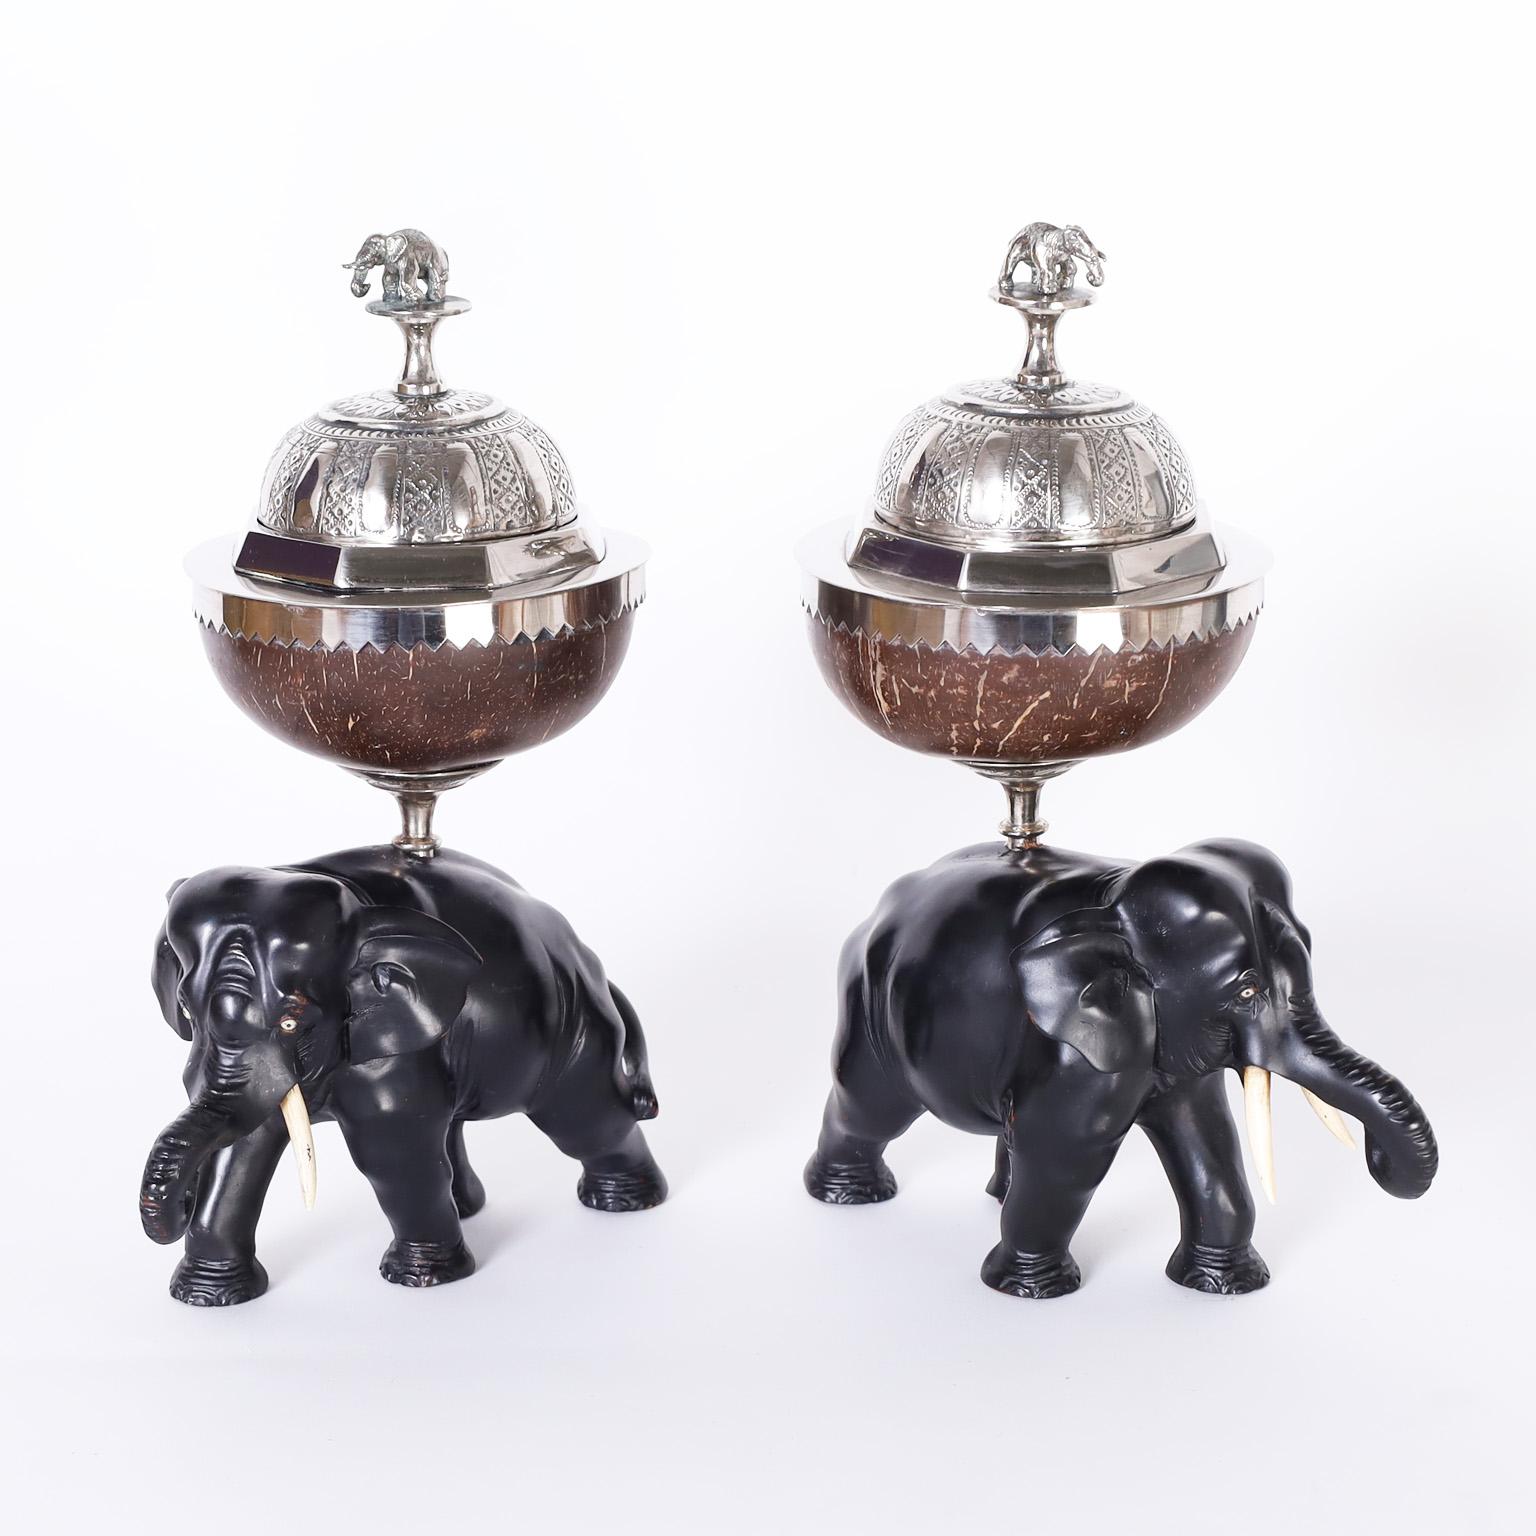 Antique Anglo Indian pair of tea caddies with silvered metal tops having elephant handles over coconut bowls above carved ebony elephants with bone tusks and eyes.